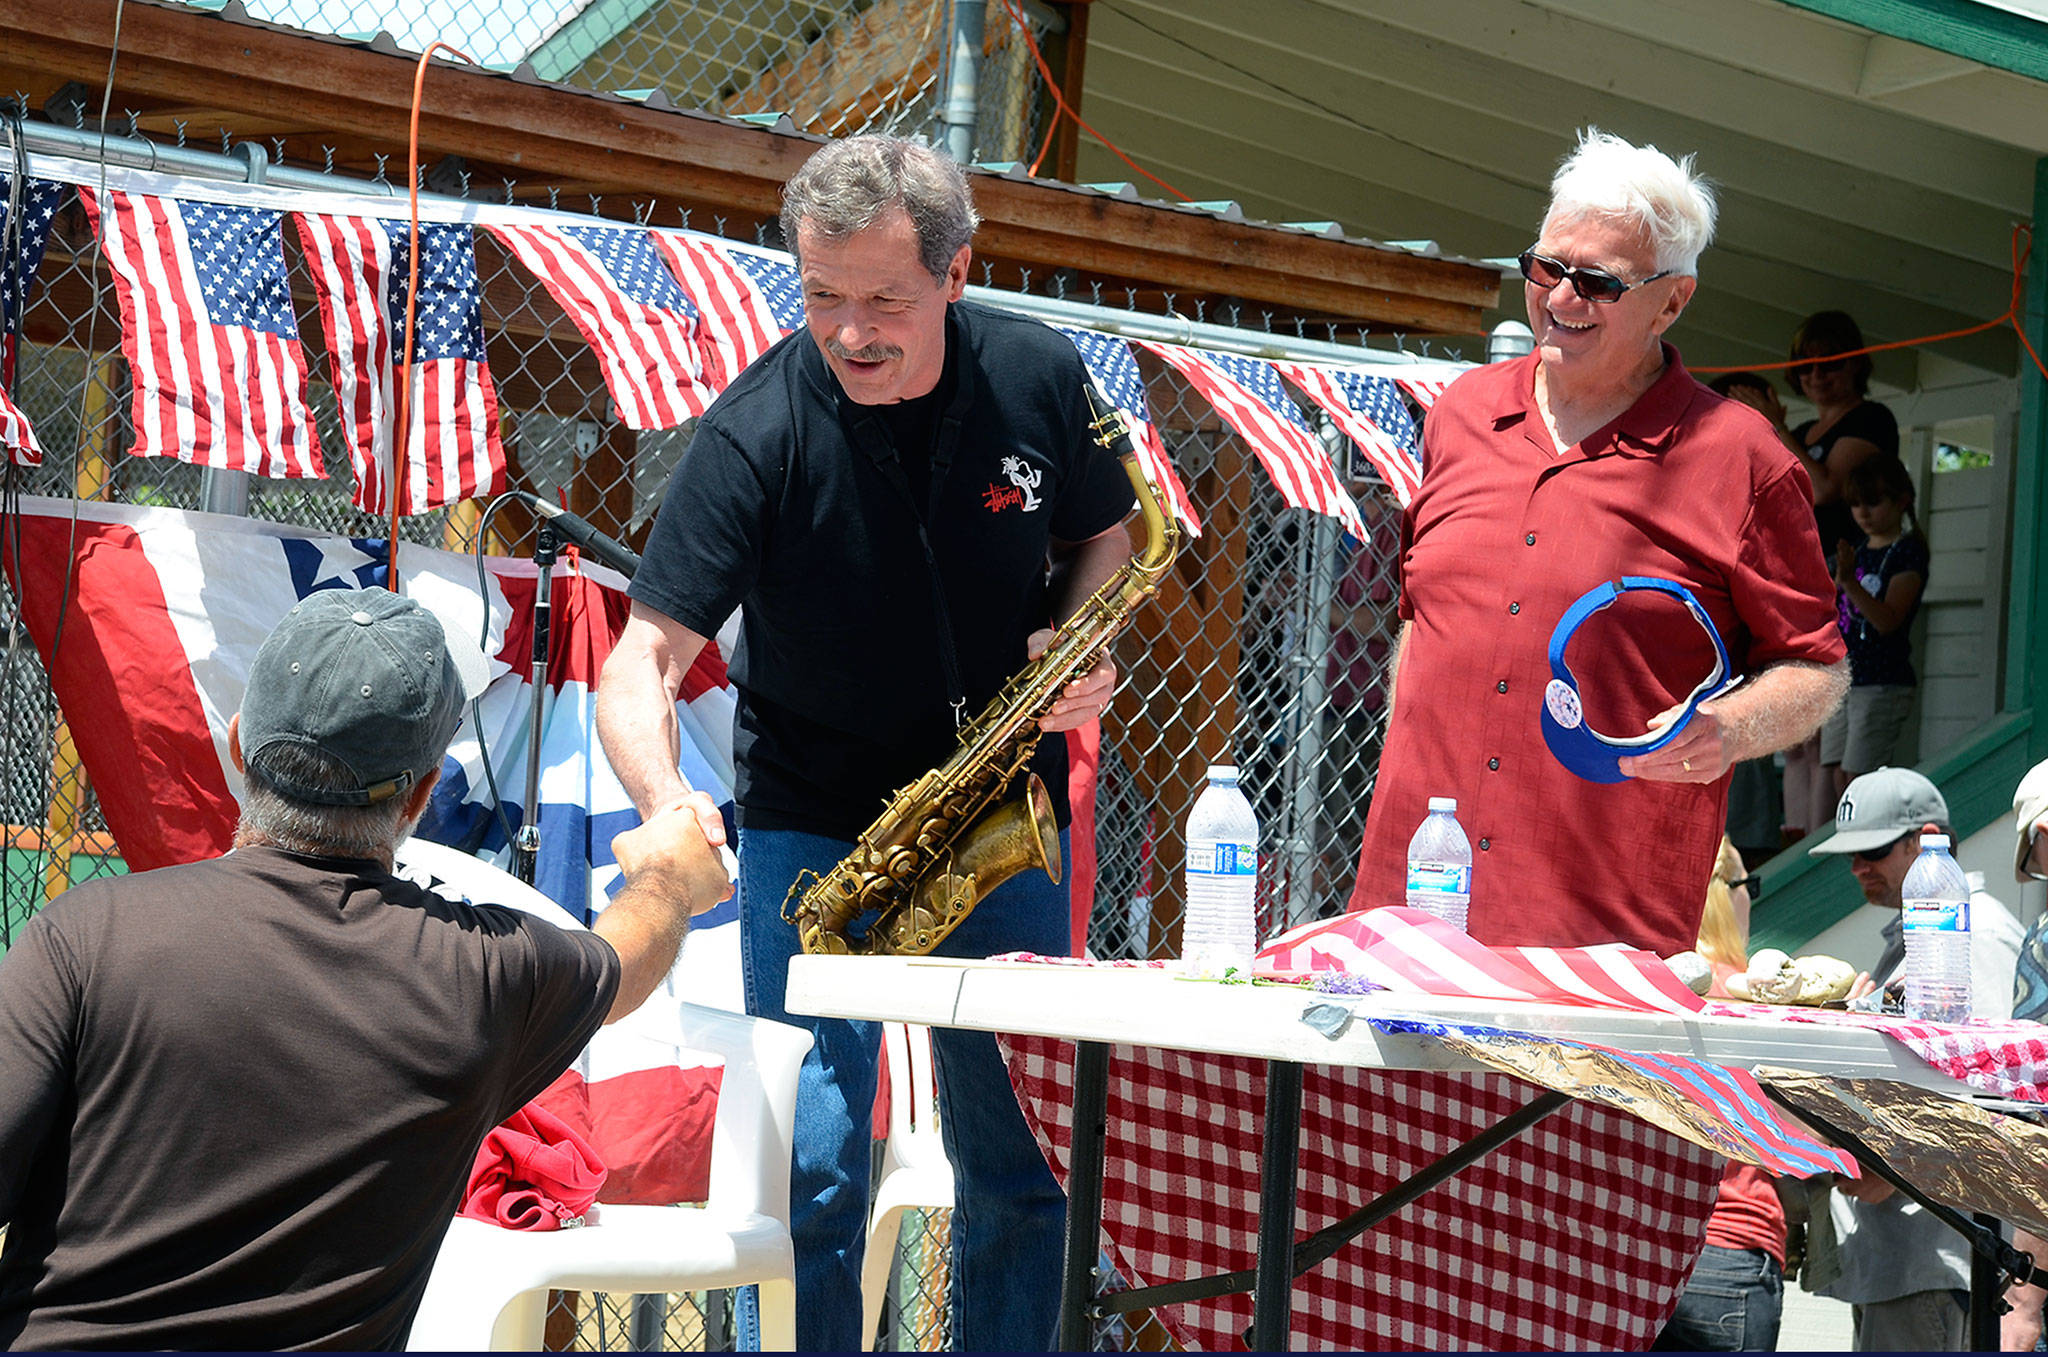 Record file — Danny Ward shakes the hand of a Maxwelton Independence Day Parade attendee in 2014. He’s been playing The National Anthem at the annual event for years and is the 2017 grand marshal.